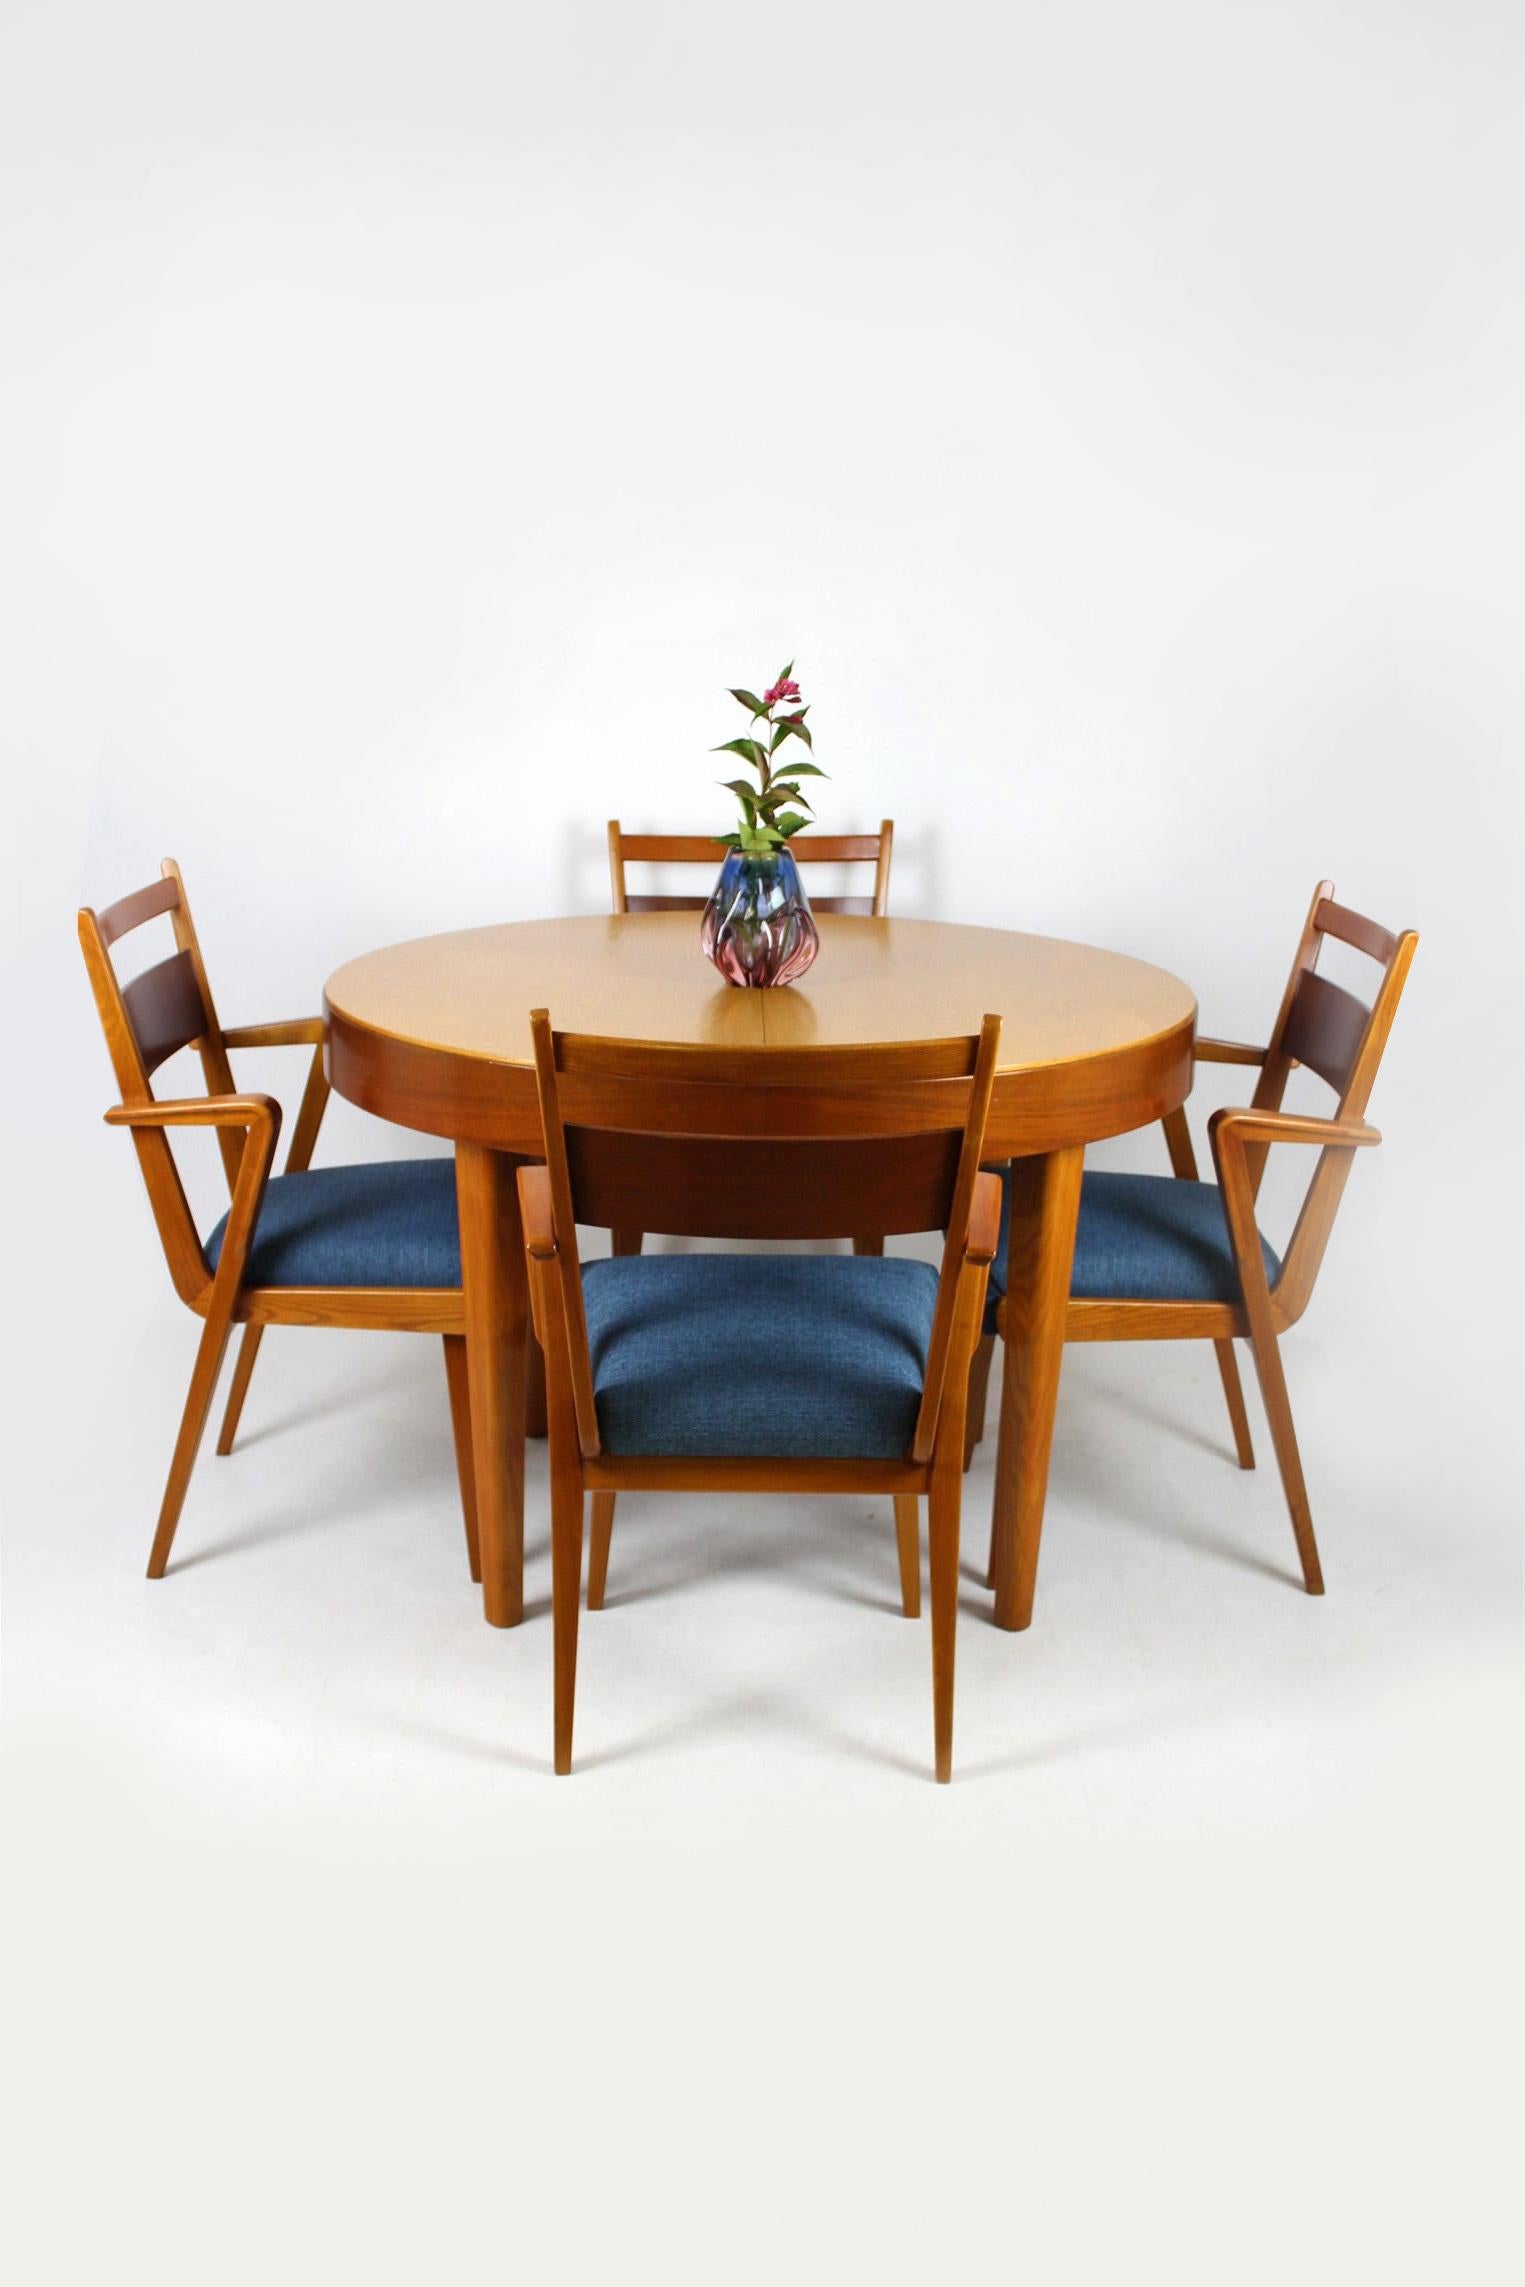 This ash and walnut folding dining table was made by Jitona Sobeslav in 1954. 
The table measures 157cm wide when fully extended.
Chairs from this set can be bought additionally.
The tabletop has been refinished.